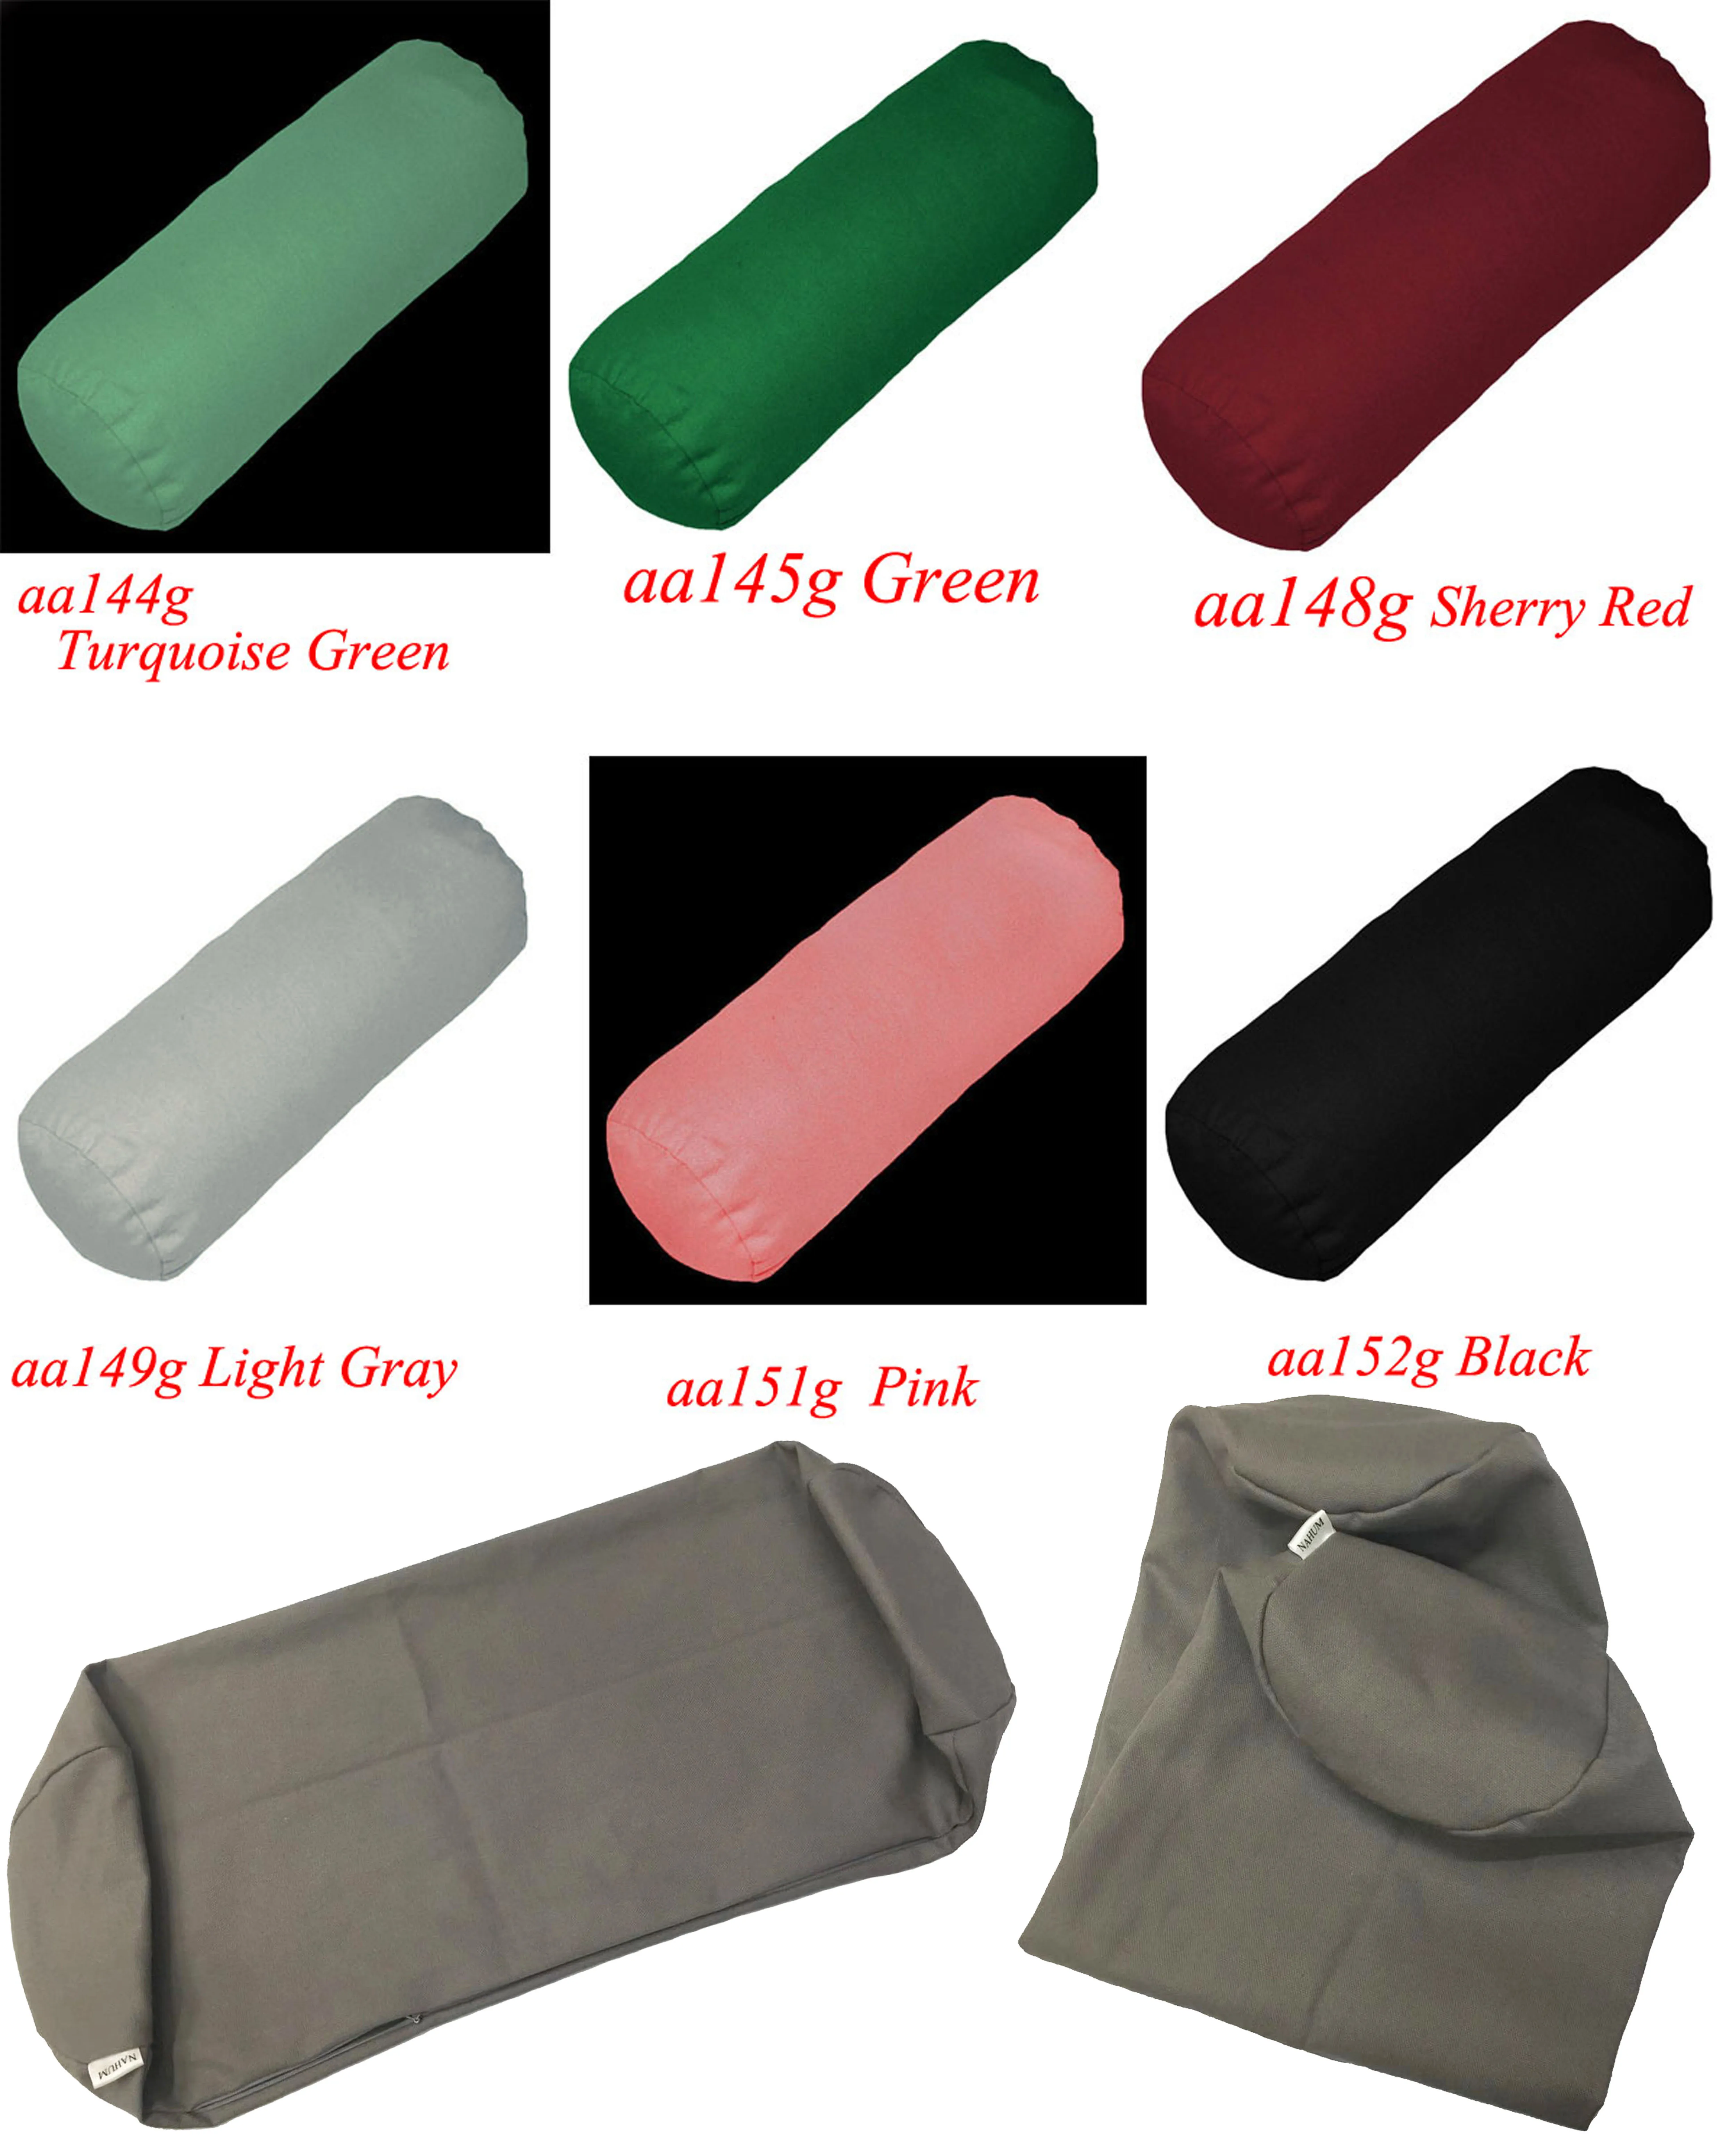 https://ae01.alicdn.com/kf/S37455665de9944fb8d4751c1d2d5e8c2e/aa152g-Only-Sell-Cover-Black-Green-Red-Gray-Pink-Blue-100-Cotton-Round-Bolster-Yoga-Canvas.jpg